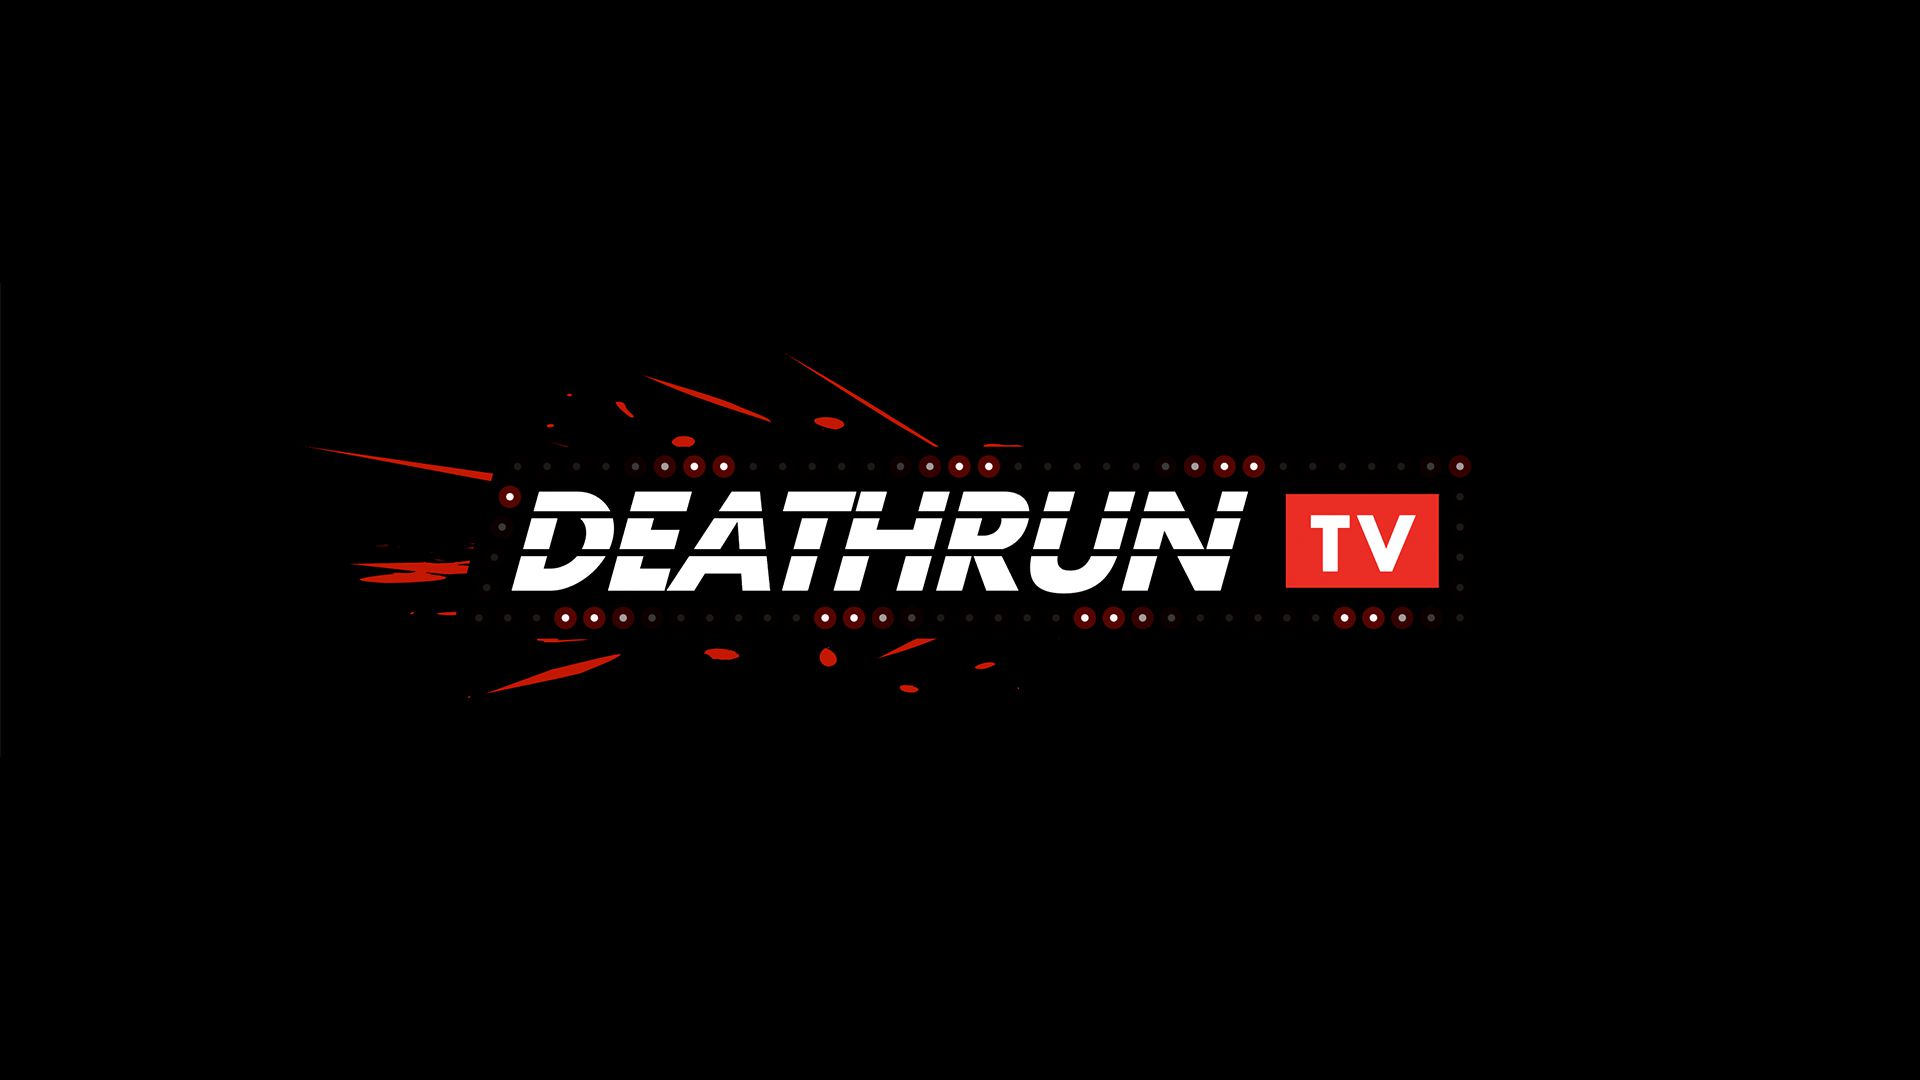 DEATHRUN TV download the new version for ipod